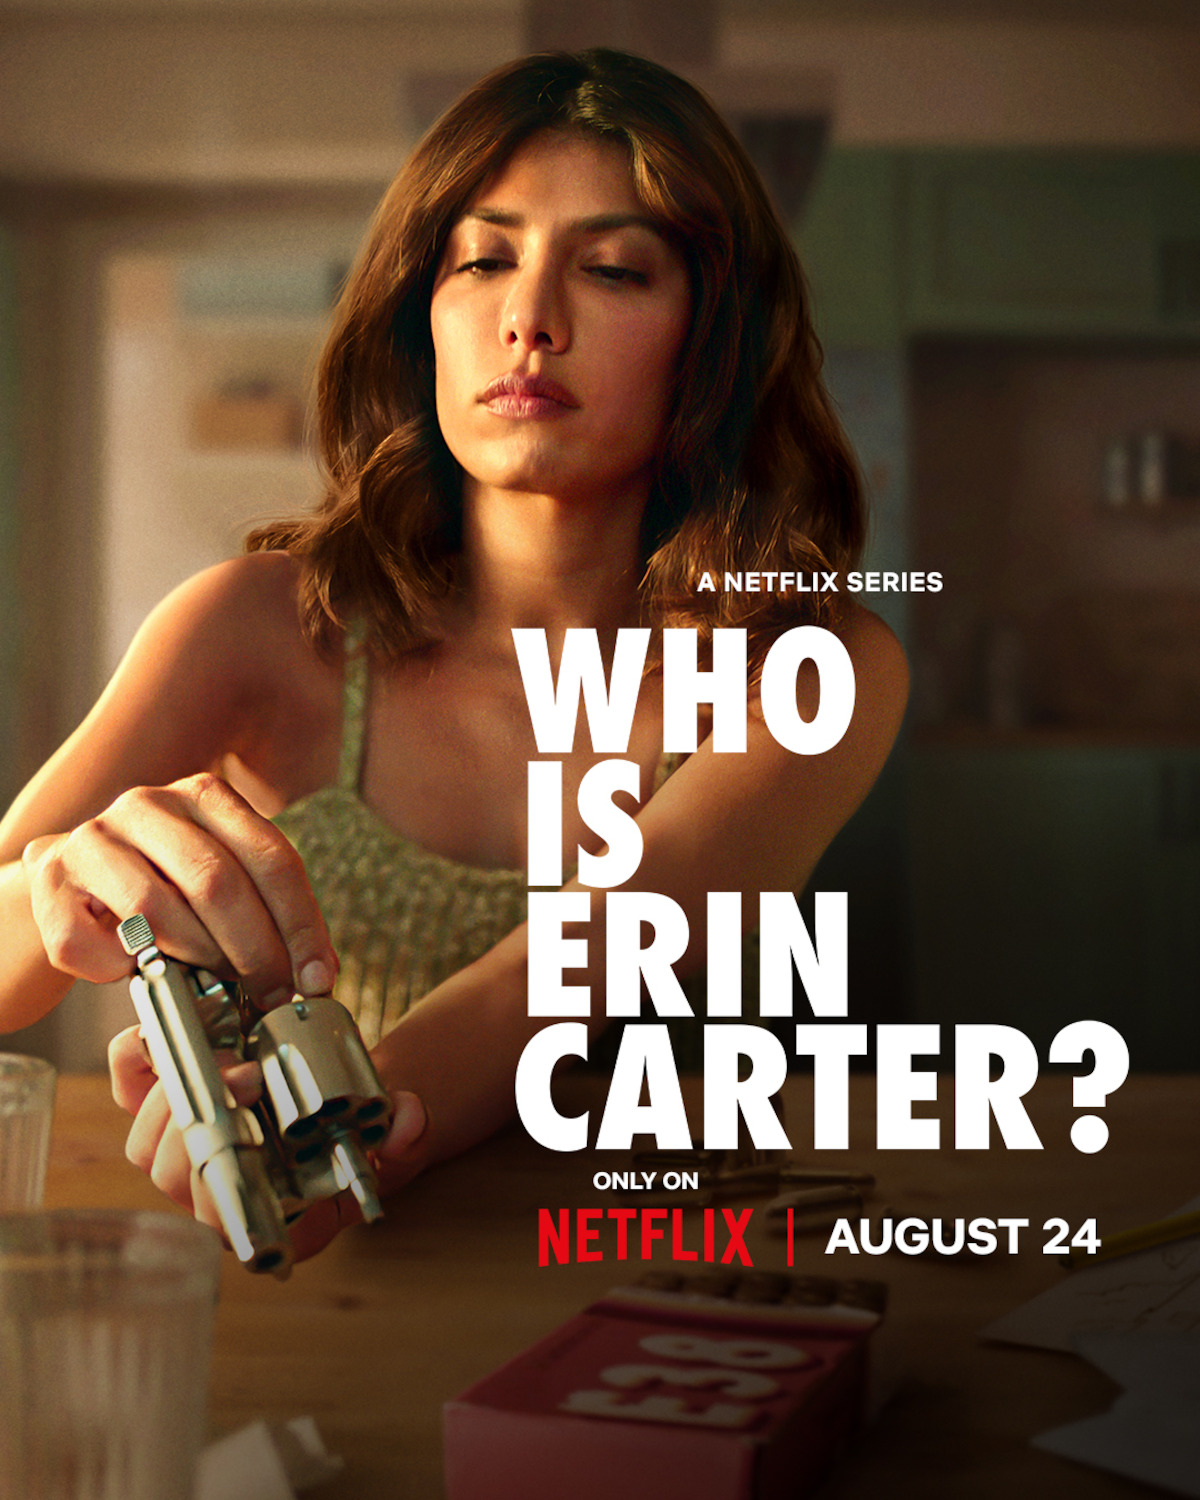 Netflix asks Who is Erin Carter? in trailer for female-led action